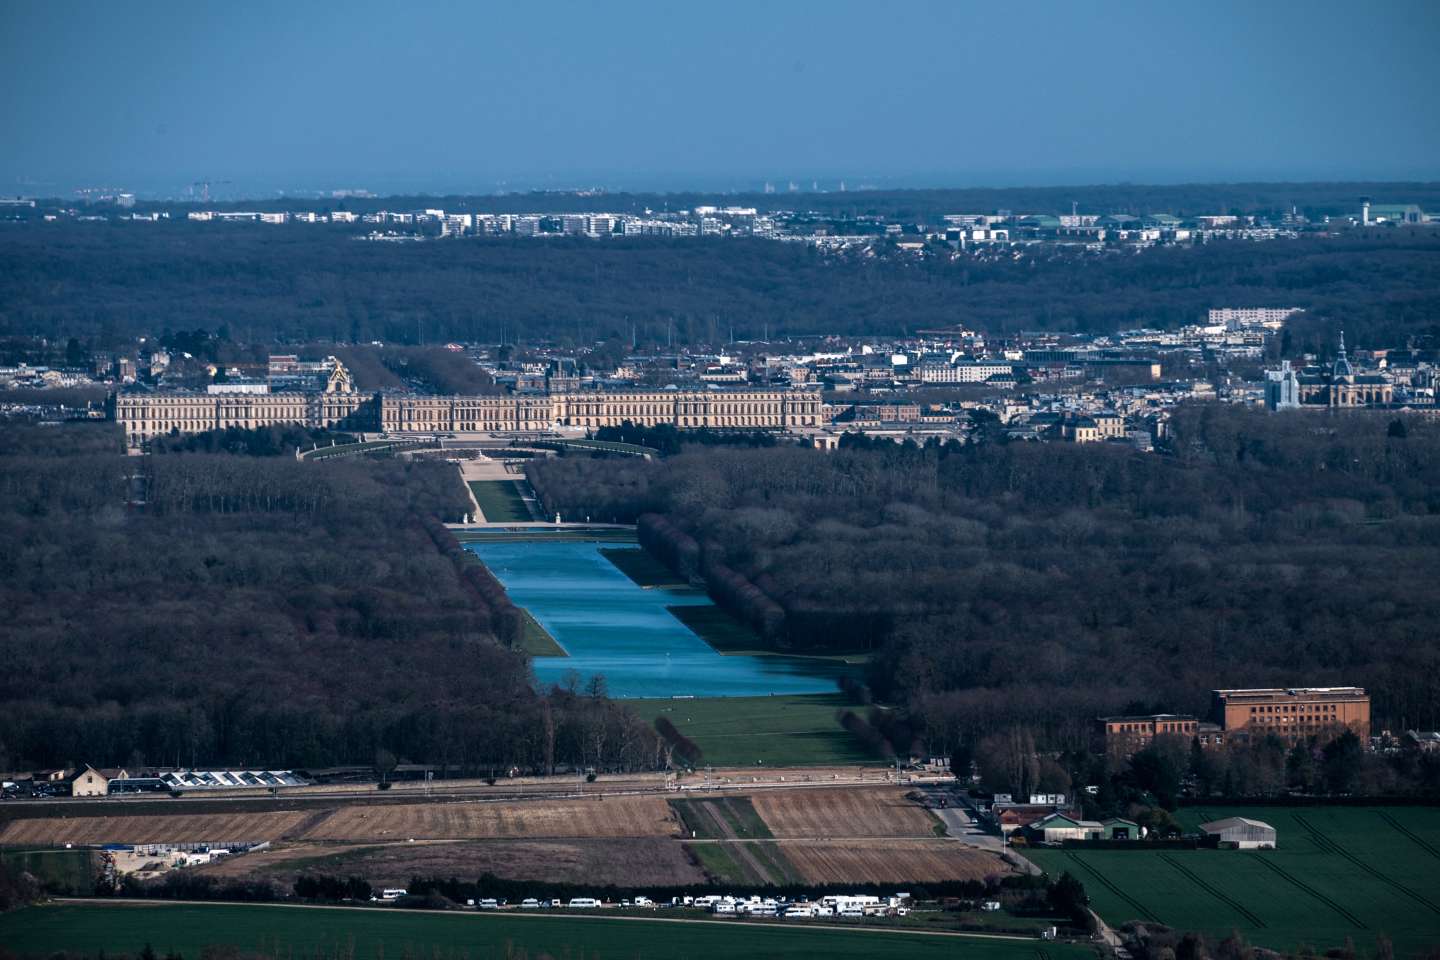 Versailles and its castle intend to take advantage of the 2024 Olympics